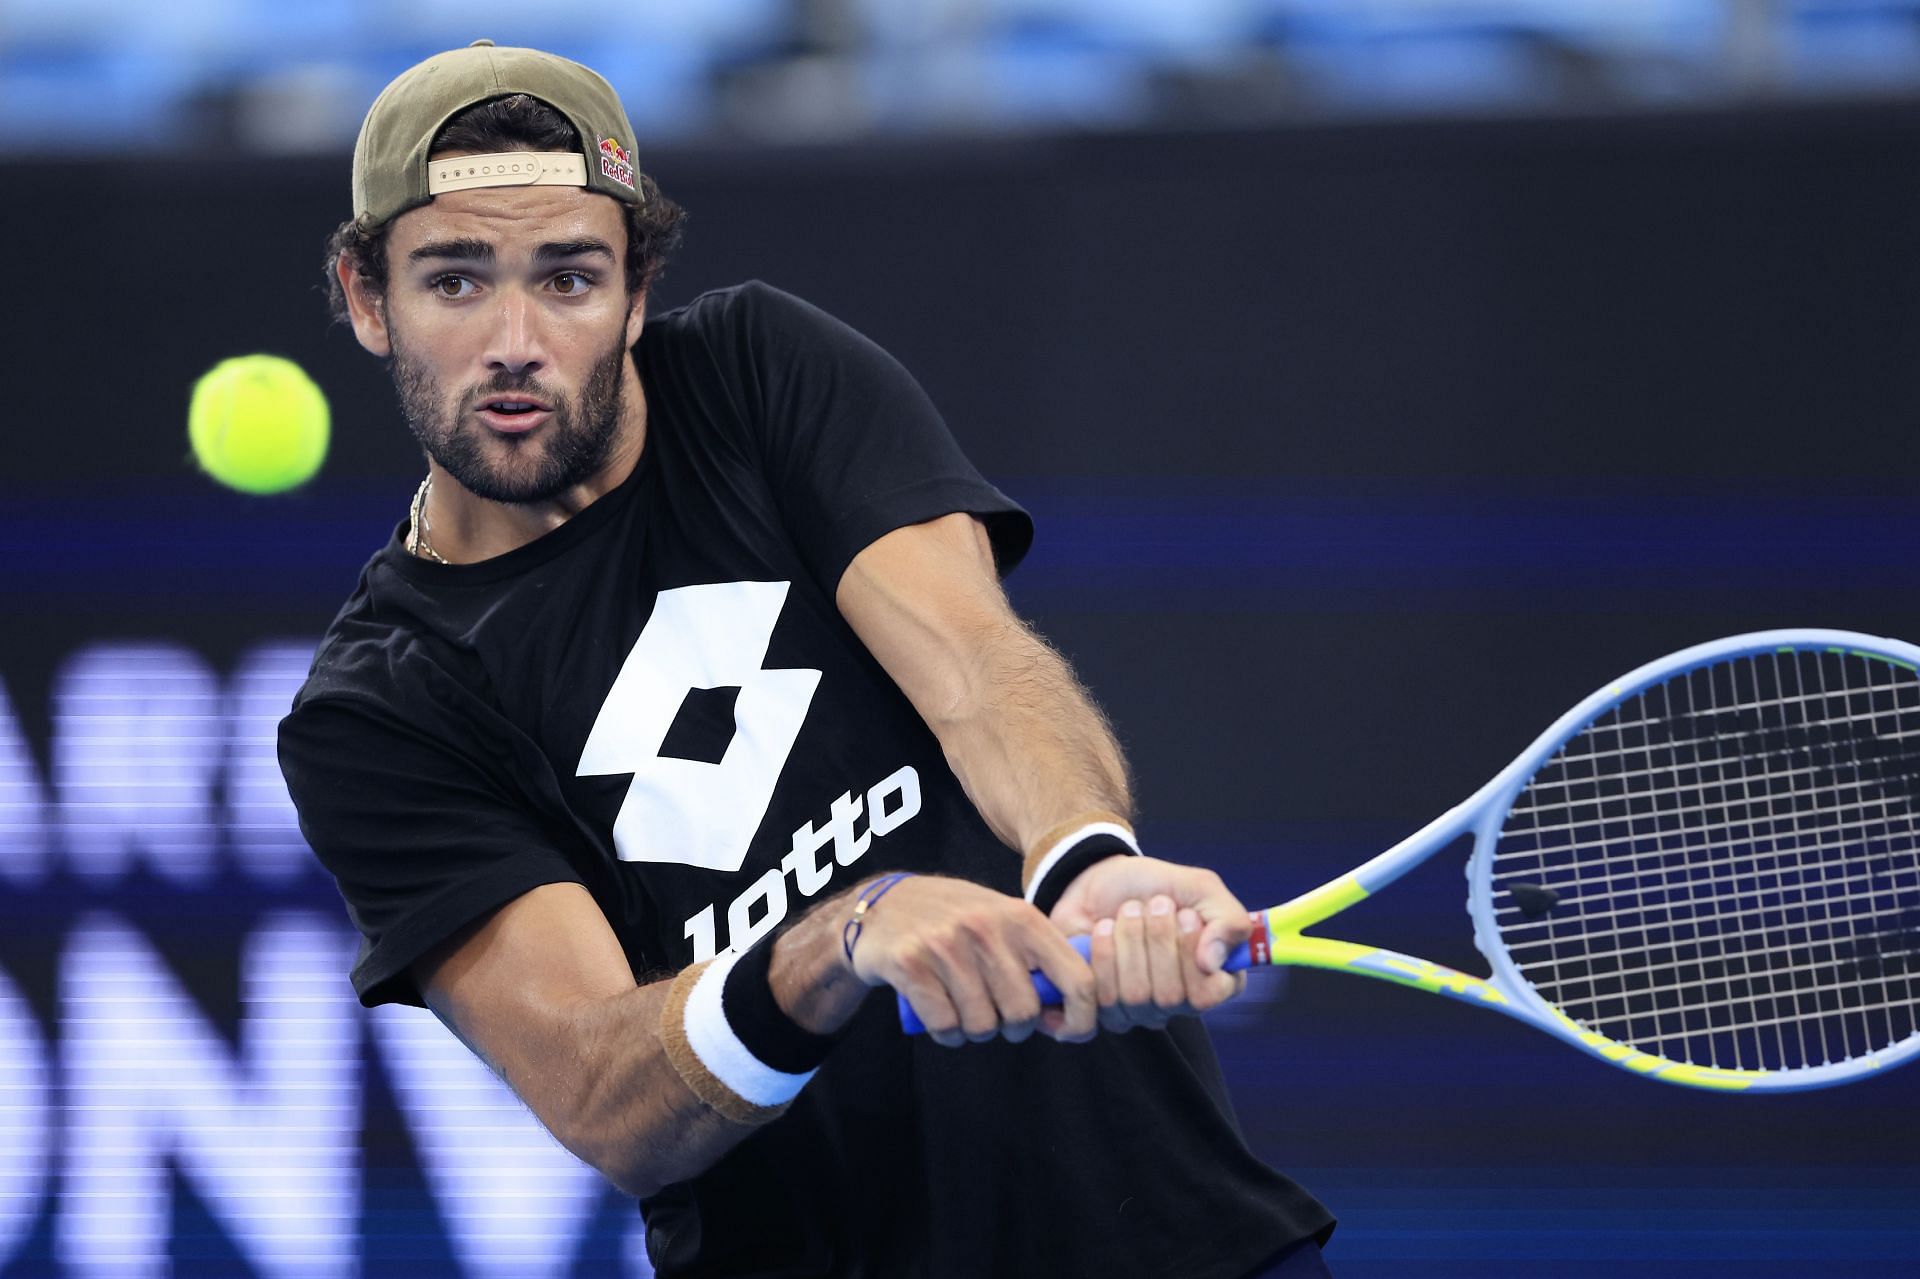 Berrettinu says Italy are aiming to win the ATP Cup